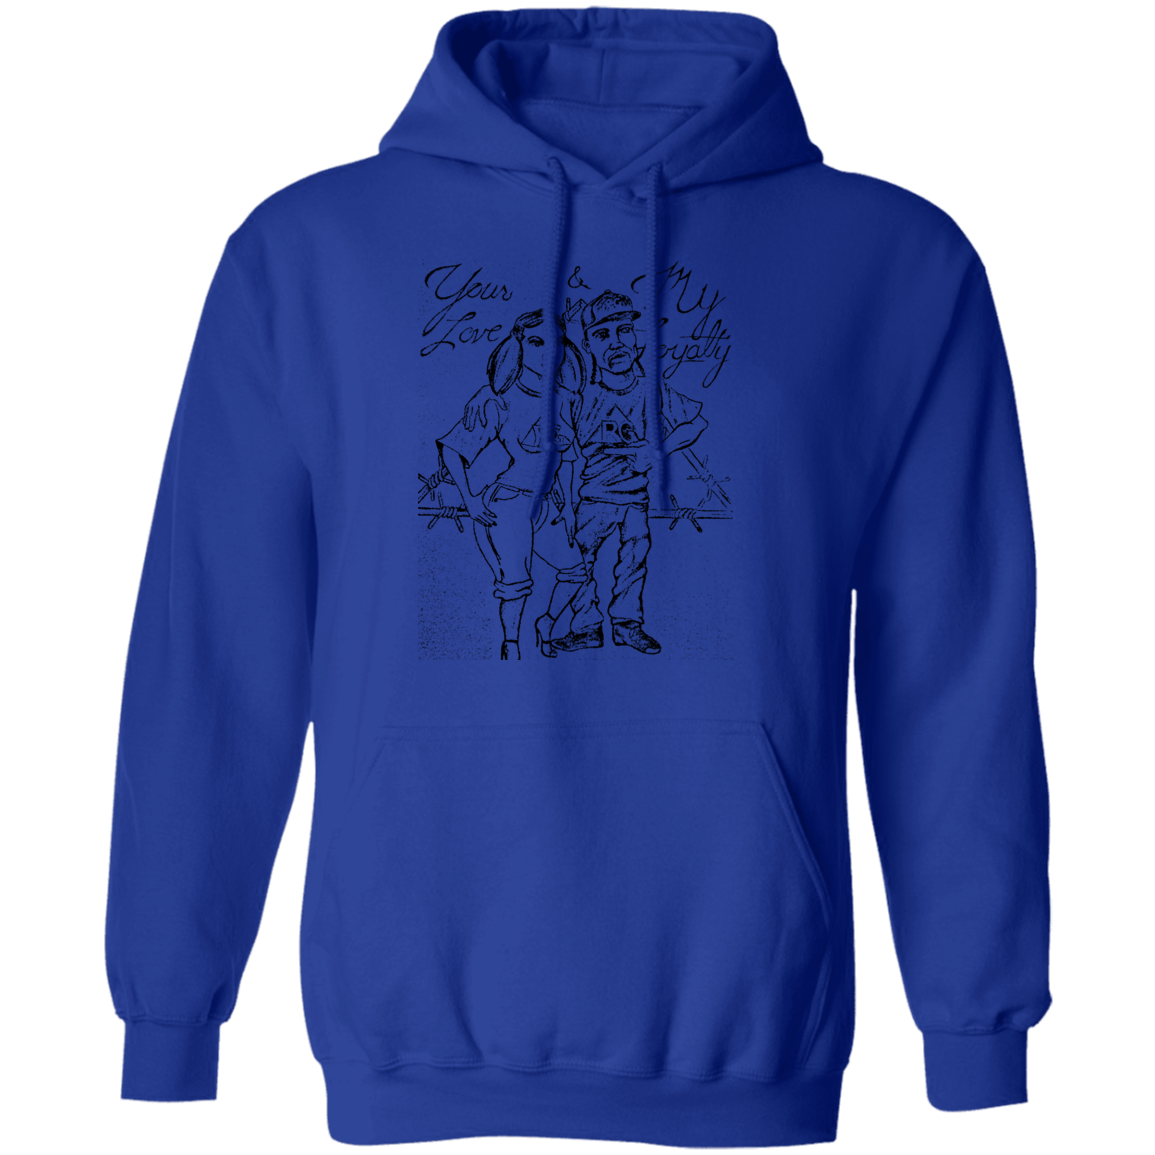 My Love Your Loyalty Pullover Hoodie 8 oz.